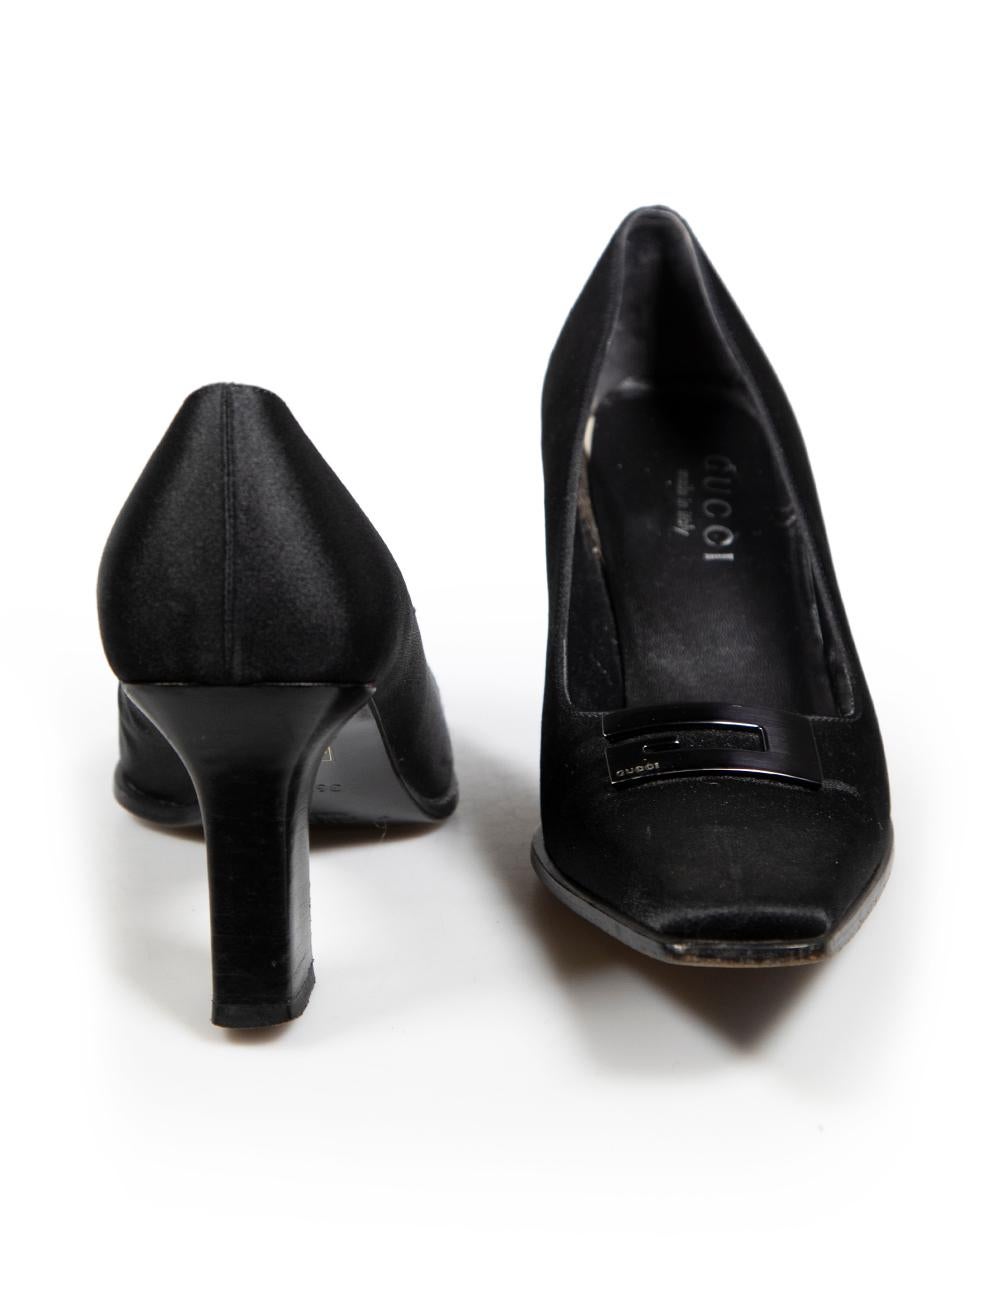 Gucci Vintage Black Satin Square Toe Pumps Size IT 36.5 In Good Condition For Sale In London, GB